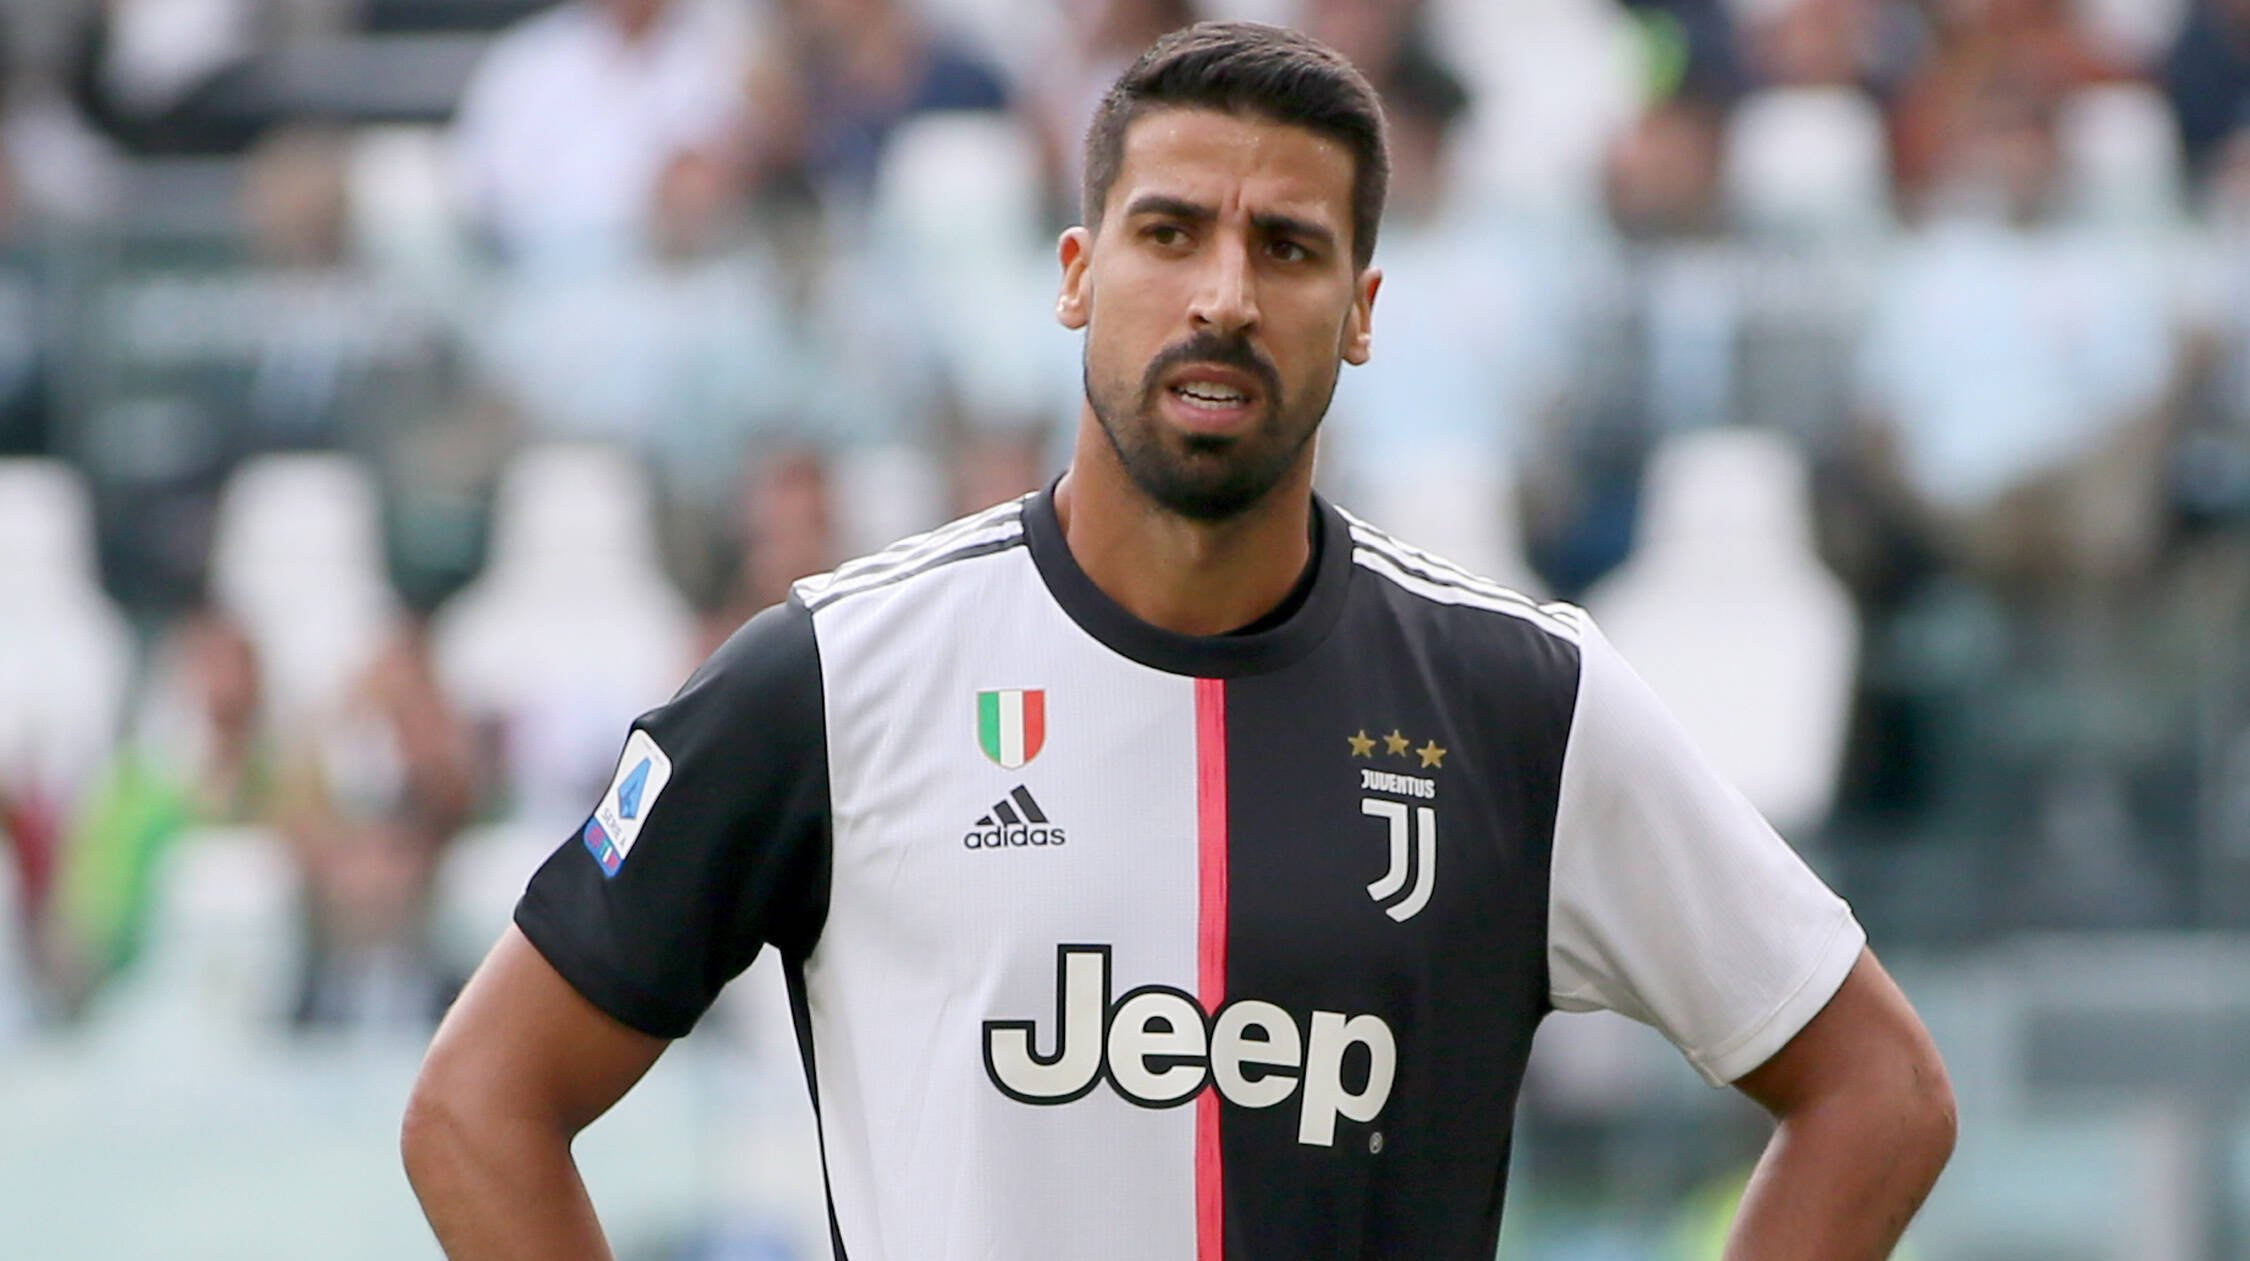 Hertha BSC sign Khedira from Juventus: “Want to help with my experience” |  Transfermarkt